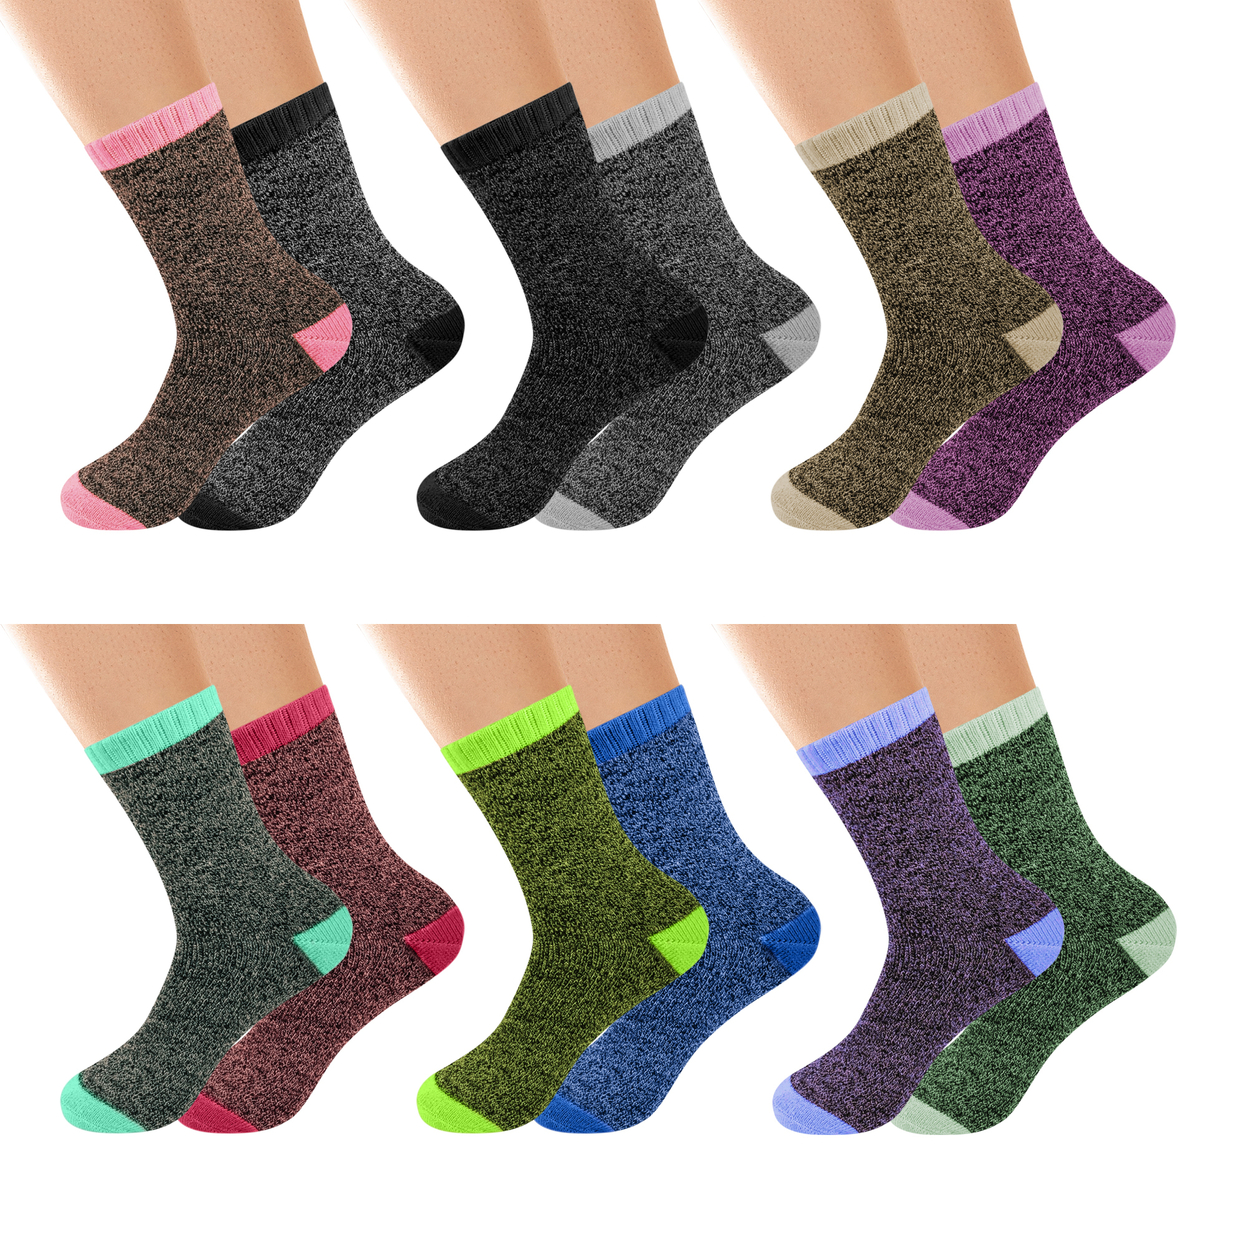 12-Pairs: Women's Winter Warm Thick Soft Cozy Thermal Boot Socks